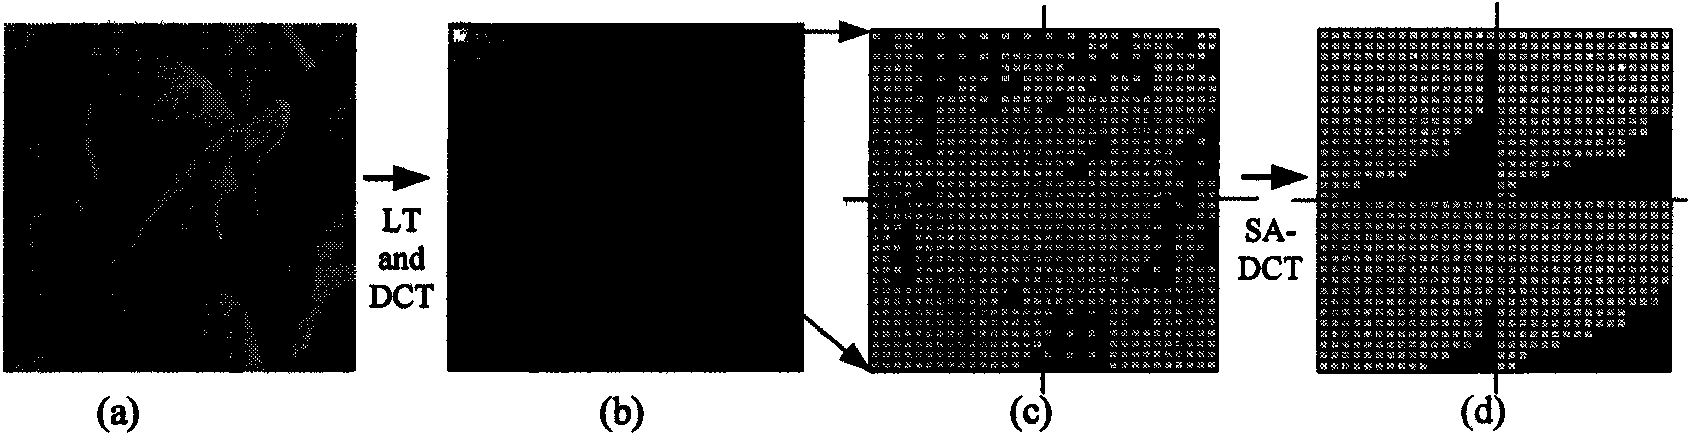 Adaptive down-sampling and lapped transform-based image compression method